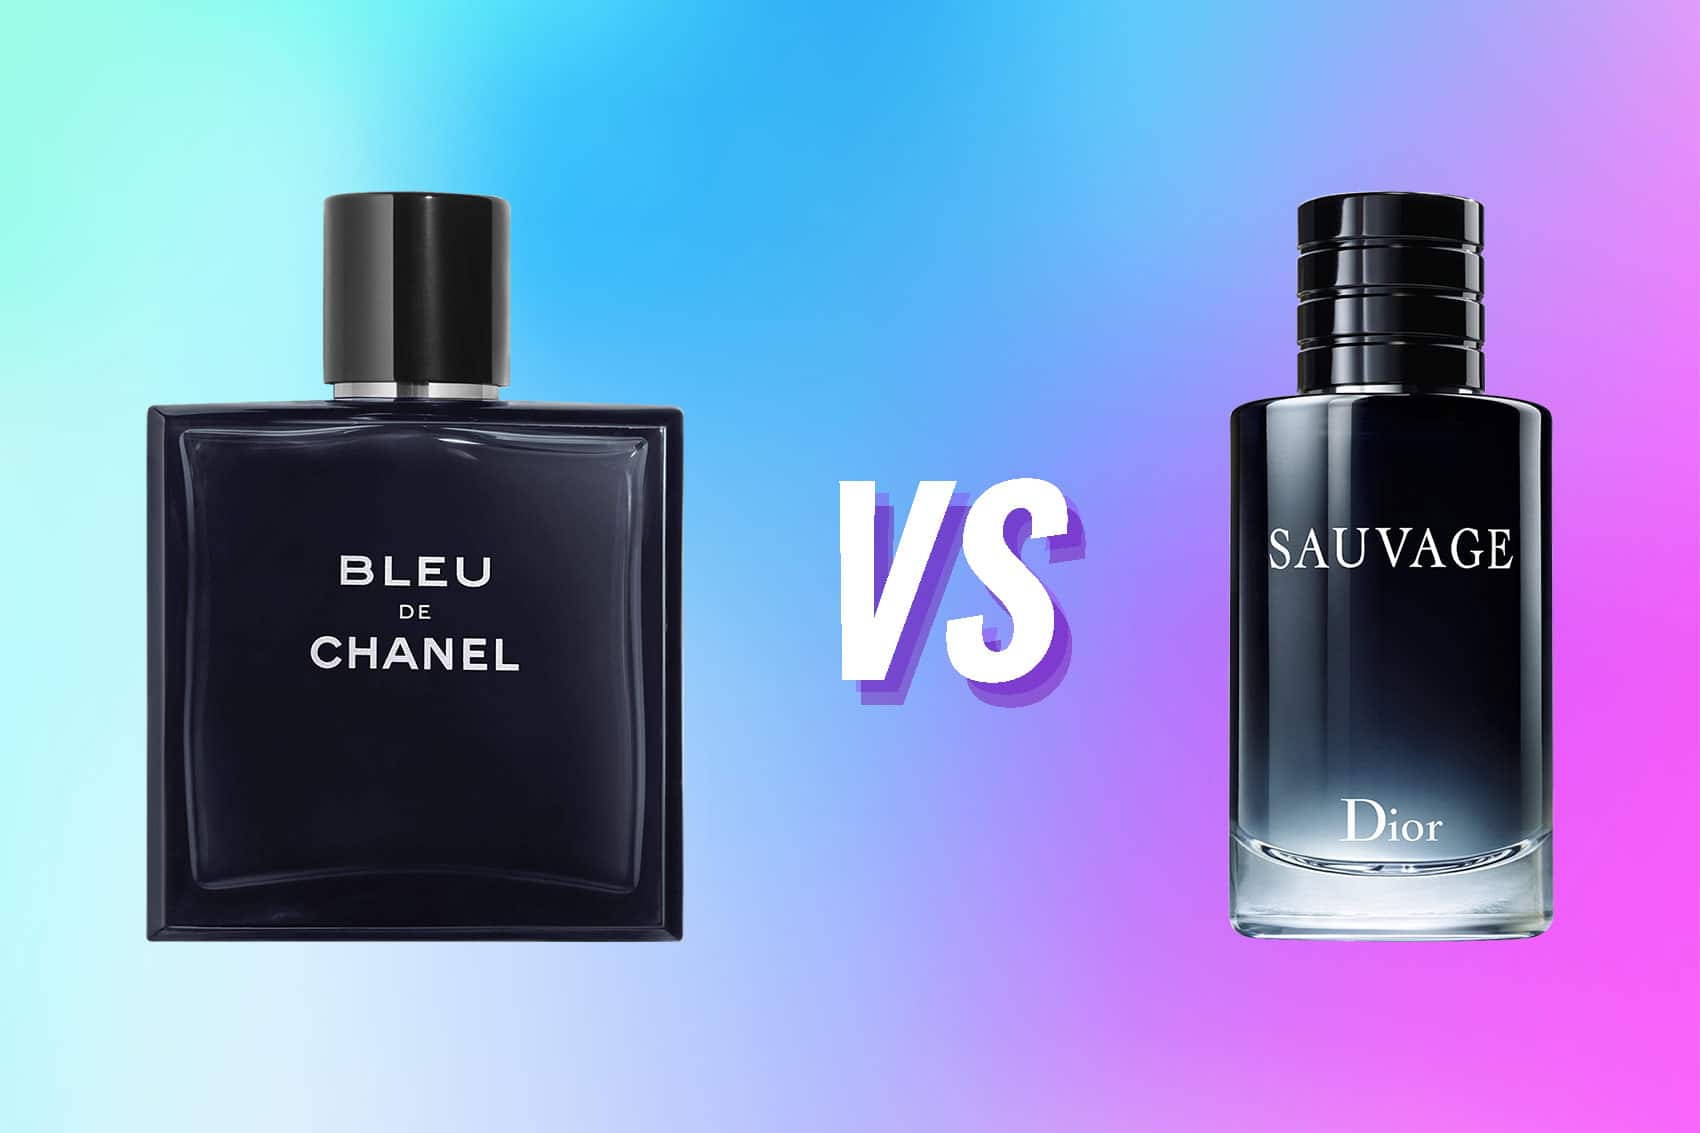 Dior vs Chanel one of fashions great rivalries